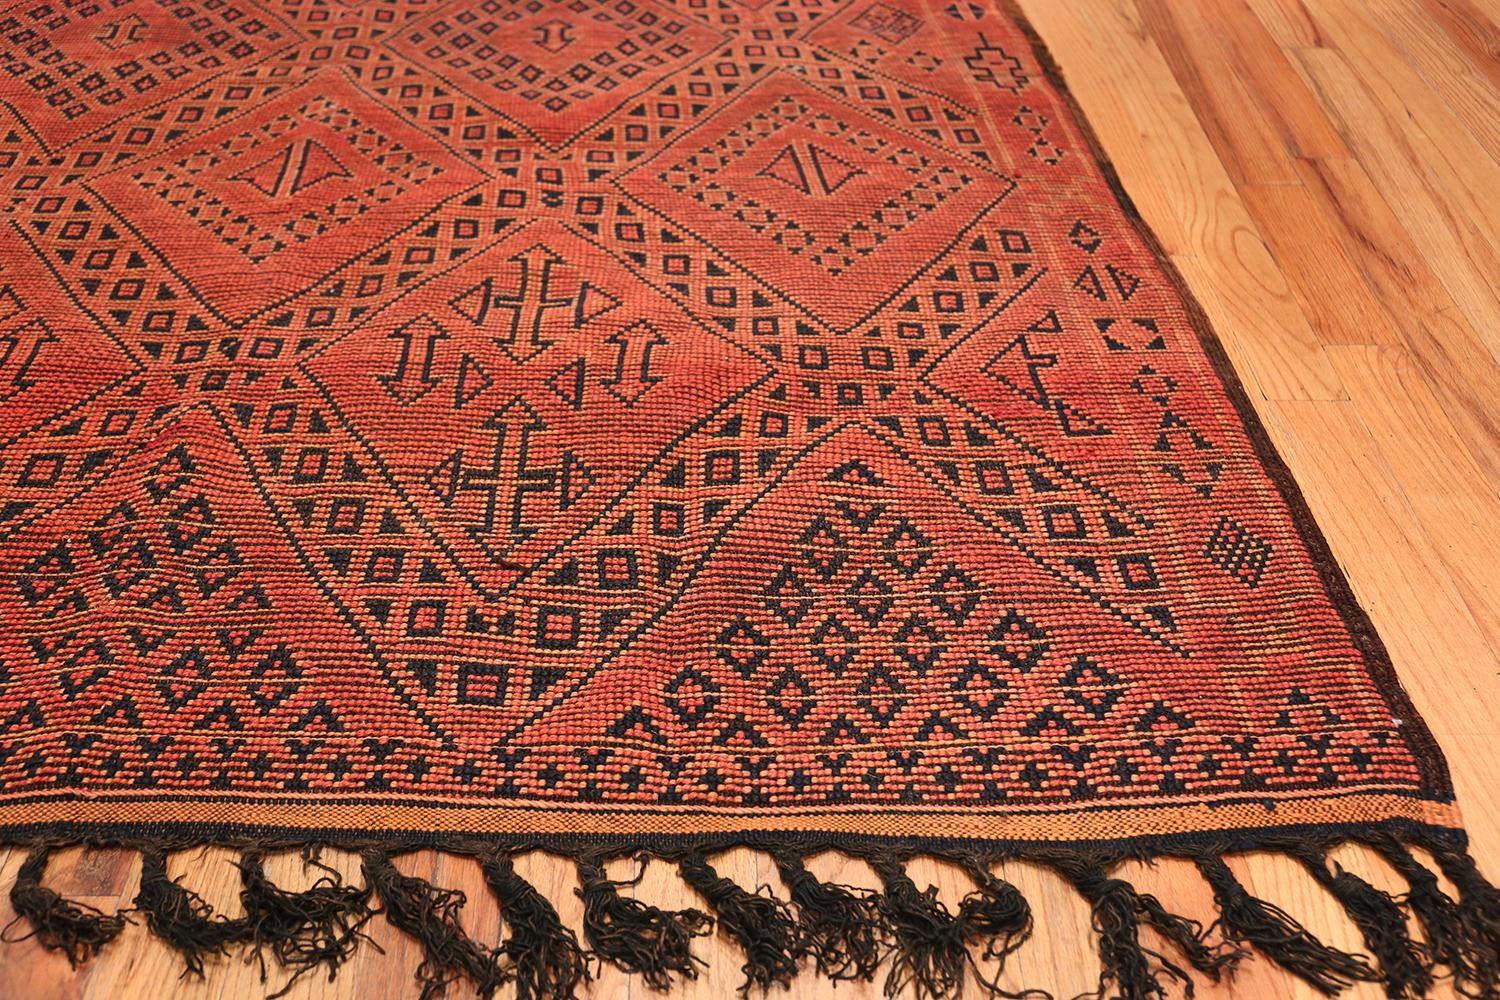 Vintage Gallery Size Double Sided Red Berber Moroccan Rug. Size: 6' x 12' 4